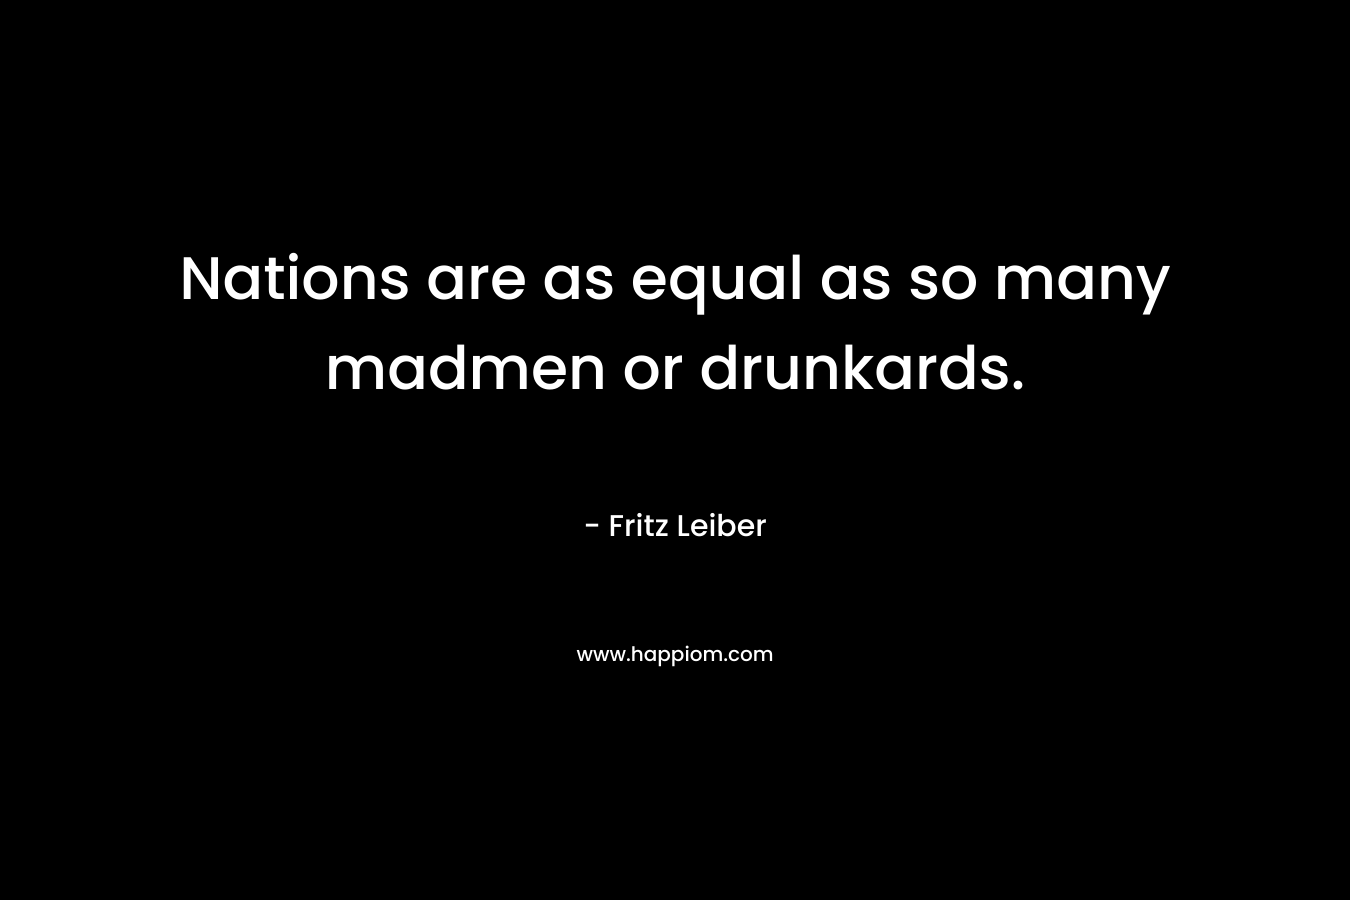 Nations are as equal as so many madmen or drunkards. – Fritz Leiber